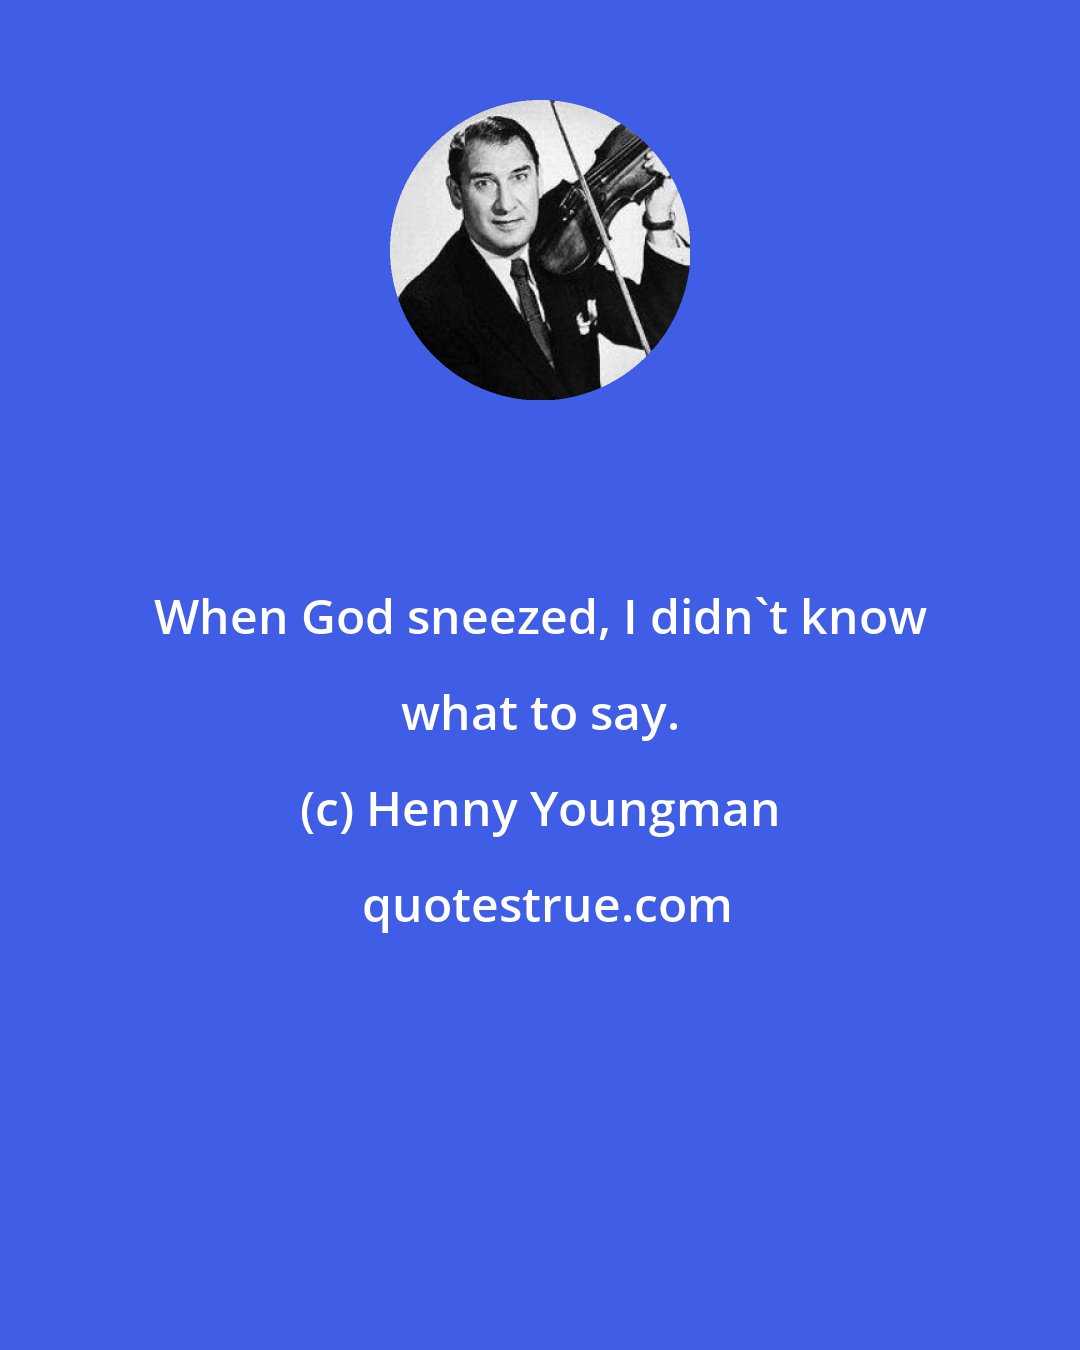 Henny Youngman: When God sneezed, I didn't know what to say.